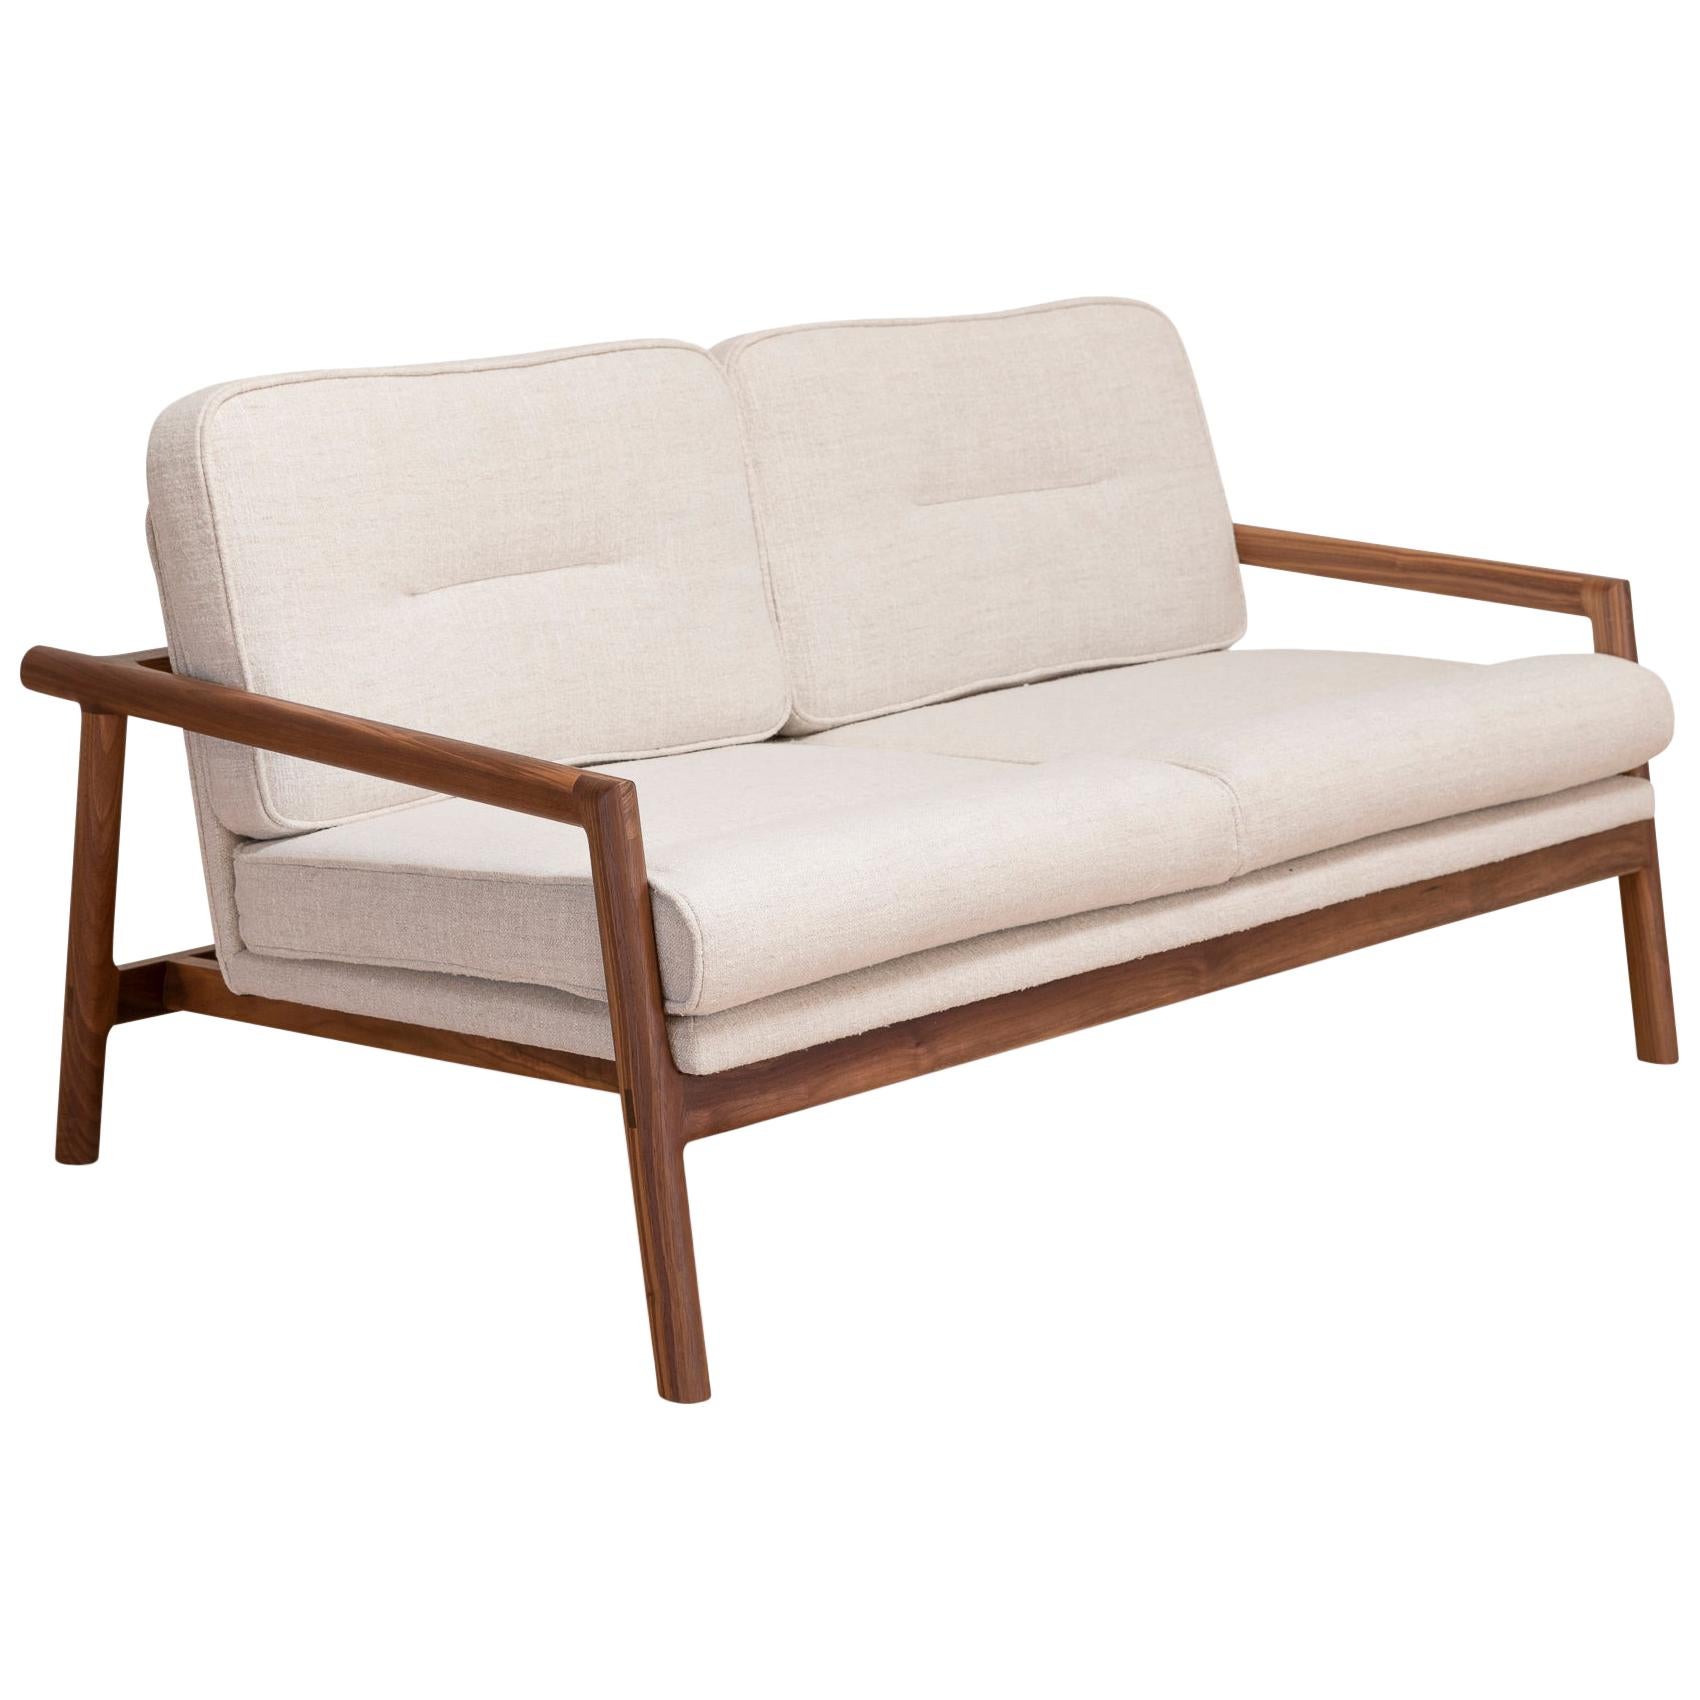 EARL Handcrafted Walnut Moresby Loveseat with Custom Linen or Leather Upholstery